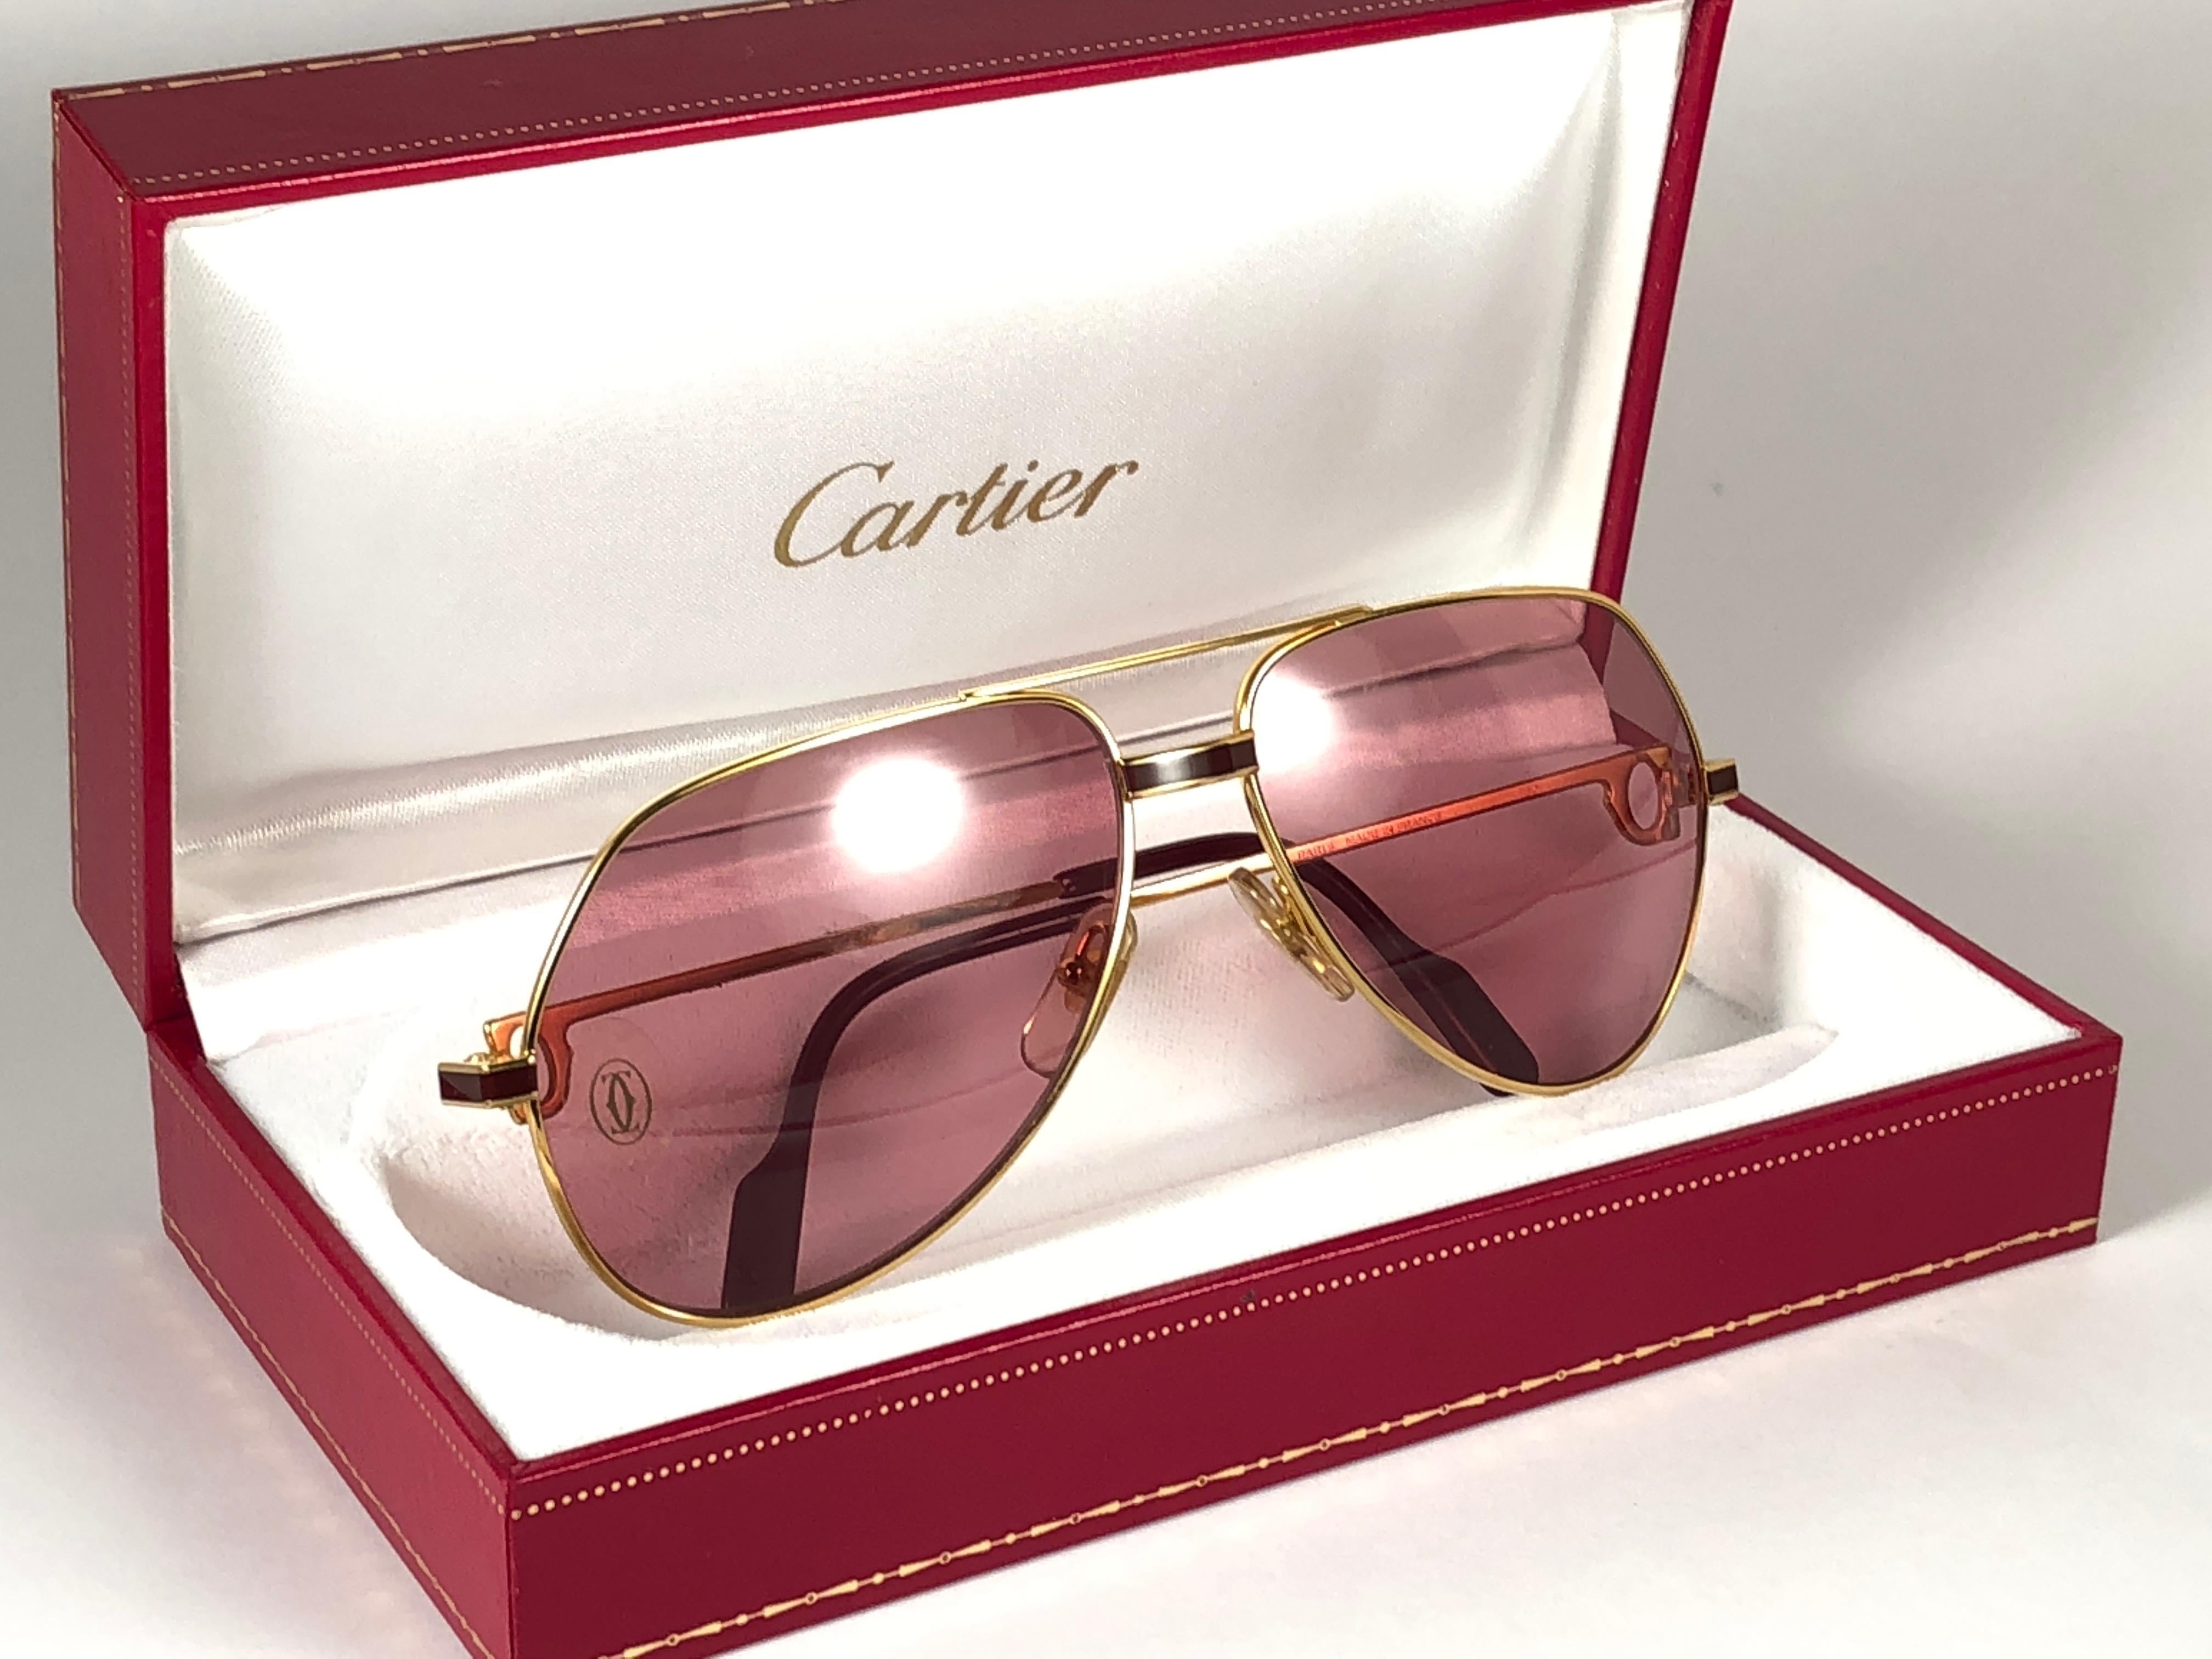 New from 1983!!! Cartier Aviator Laque de Chine Heavy plated gold sunglasses with rose (uv protection) Lenses.
All hallmarks. 
Red enamel with Cartier gold signs on the ear paddles. 
Both arms sport the C from Cartier on the temples.
 These are like